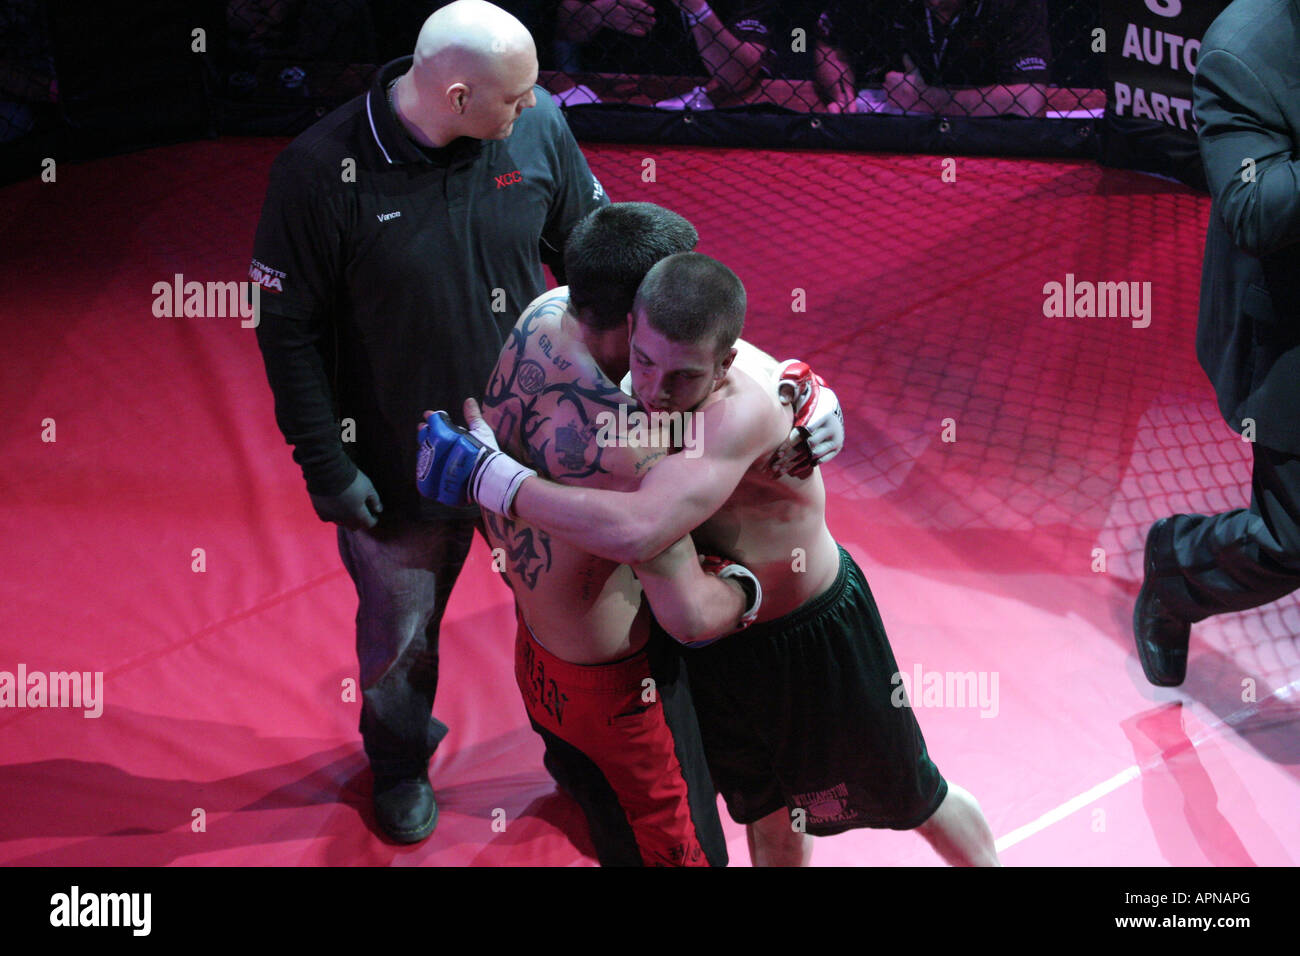 A show of respect between two mixed martial arts fighters Stock Photo